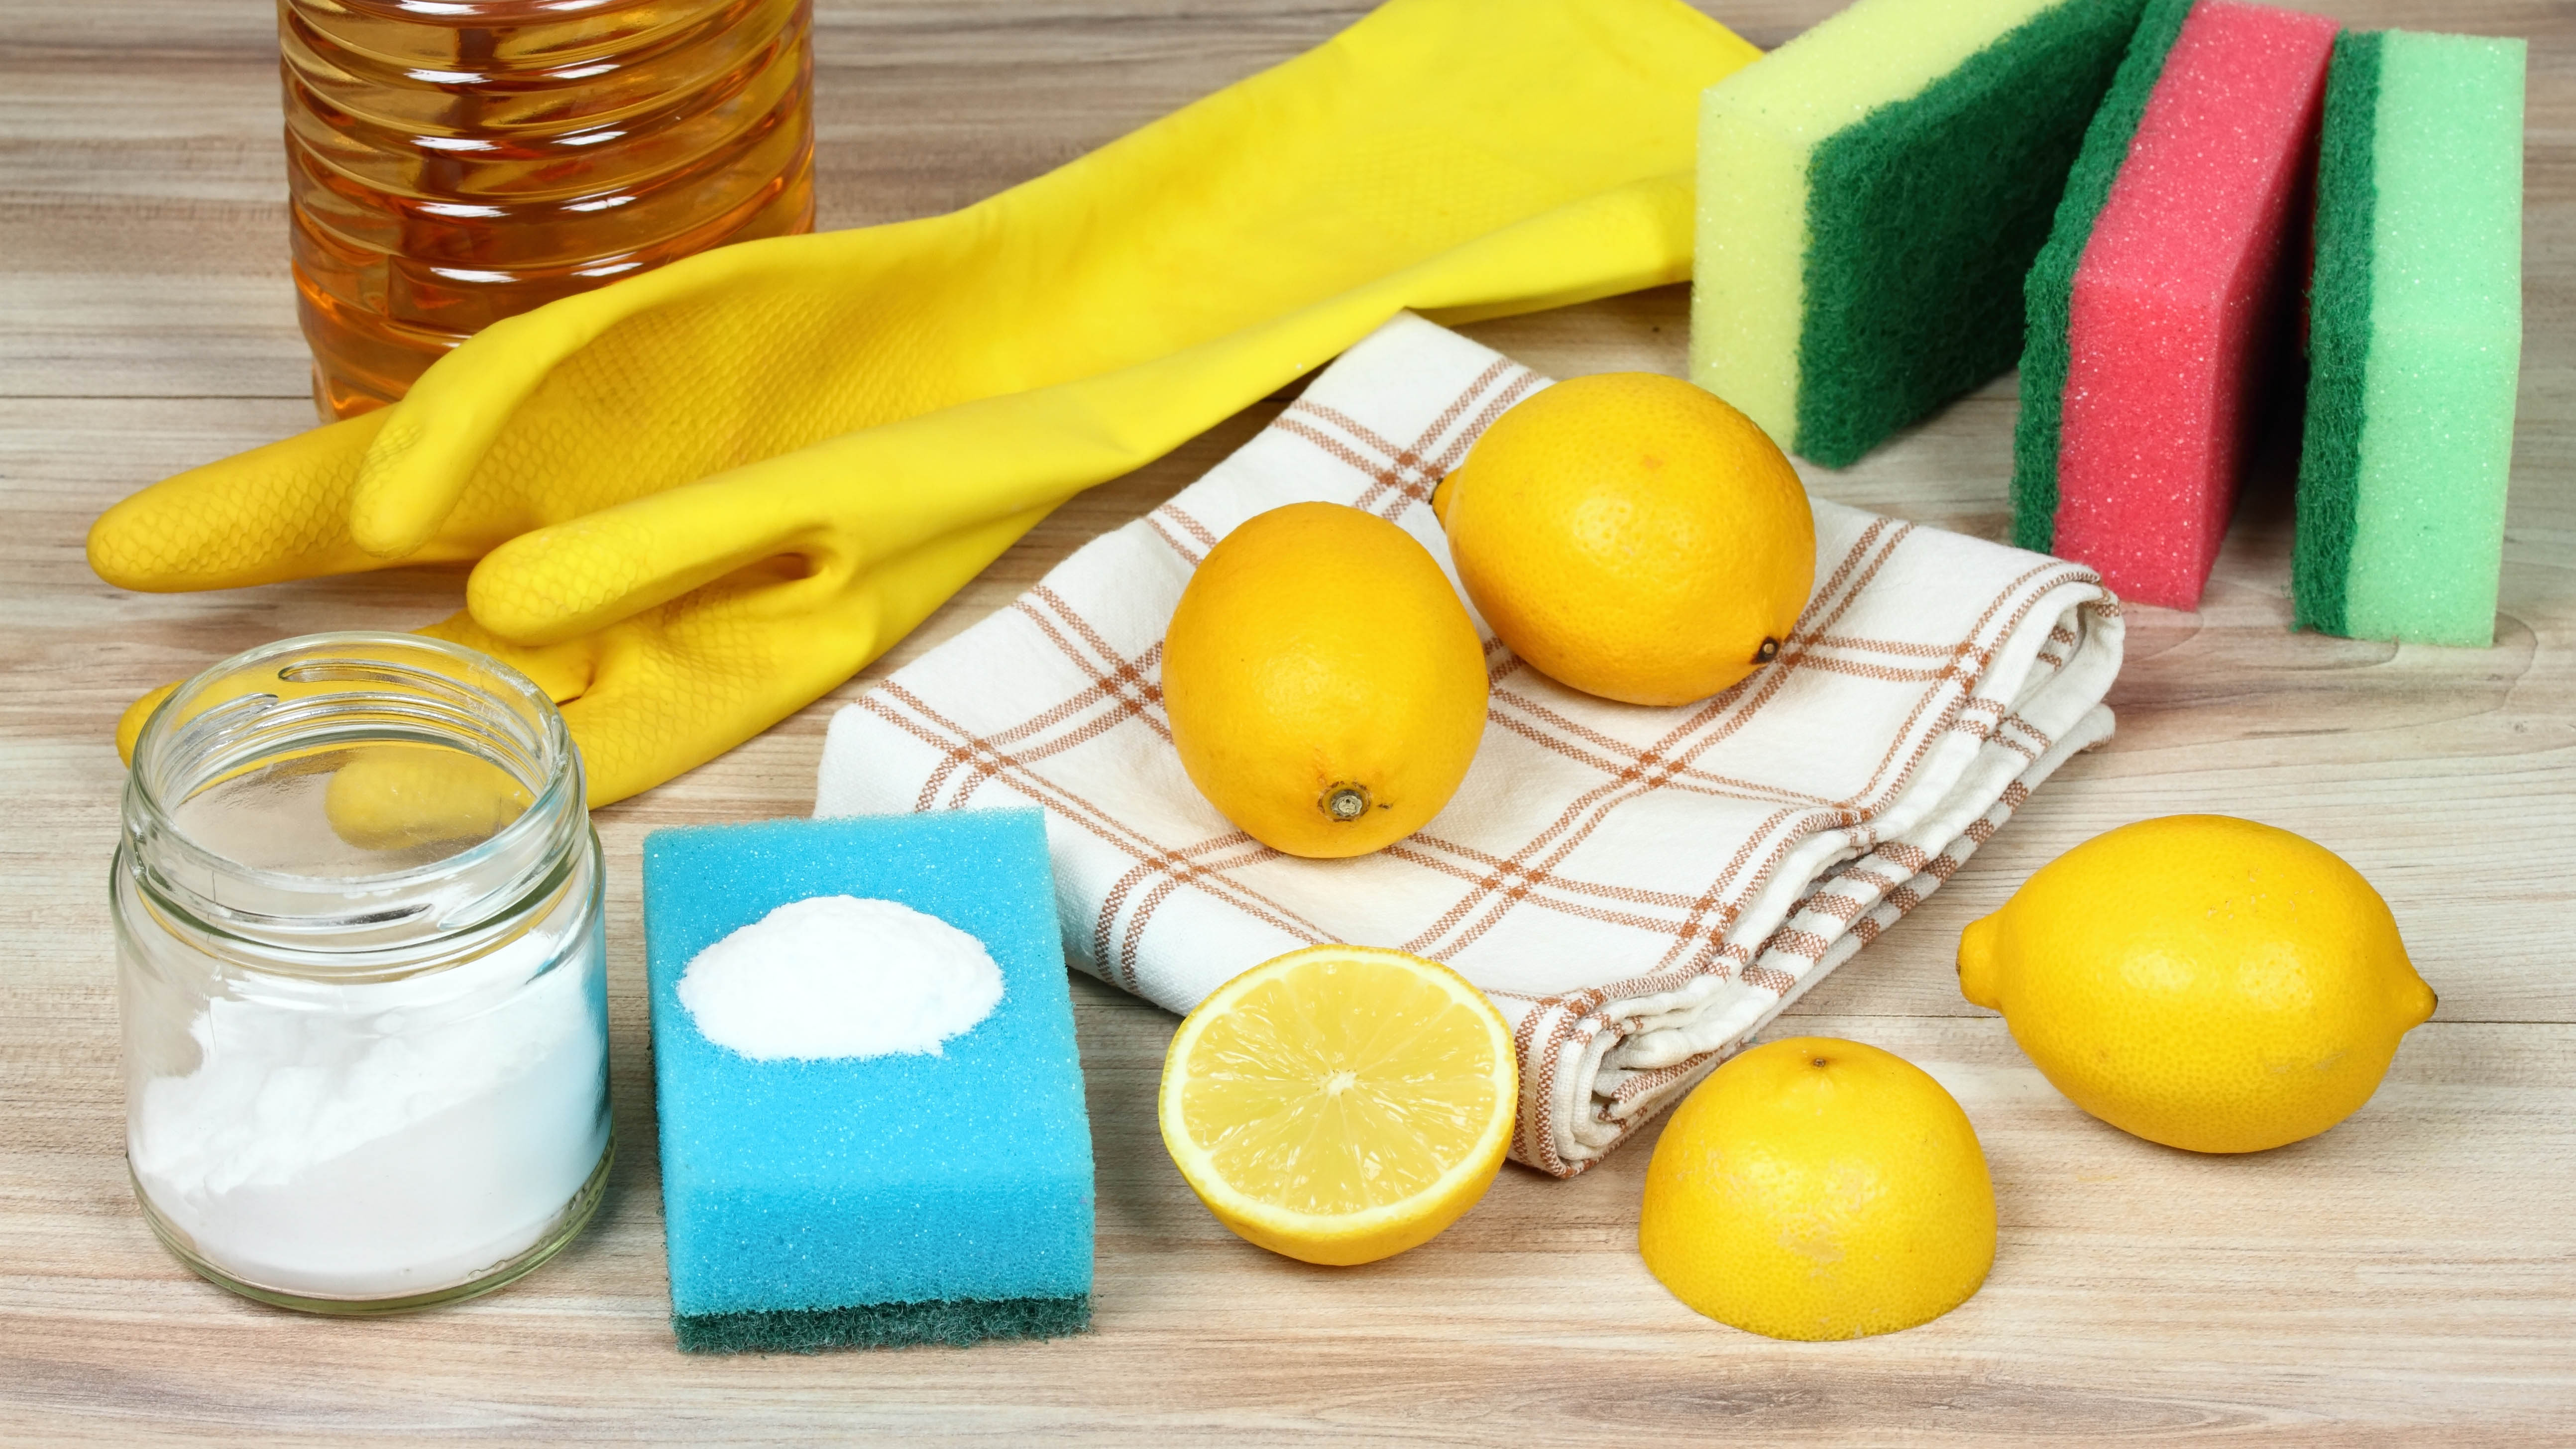 18 Ways to Clean With Lemon